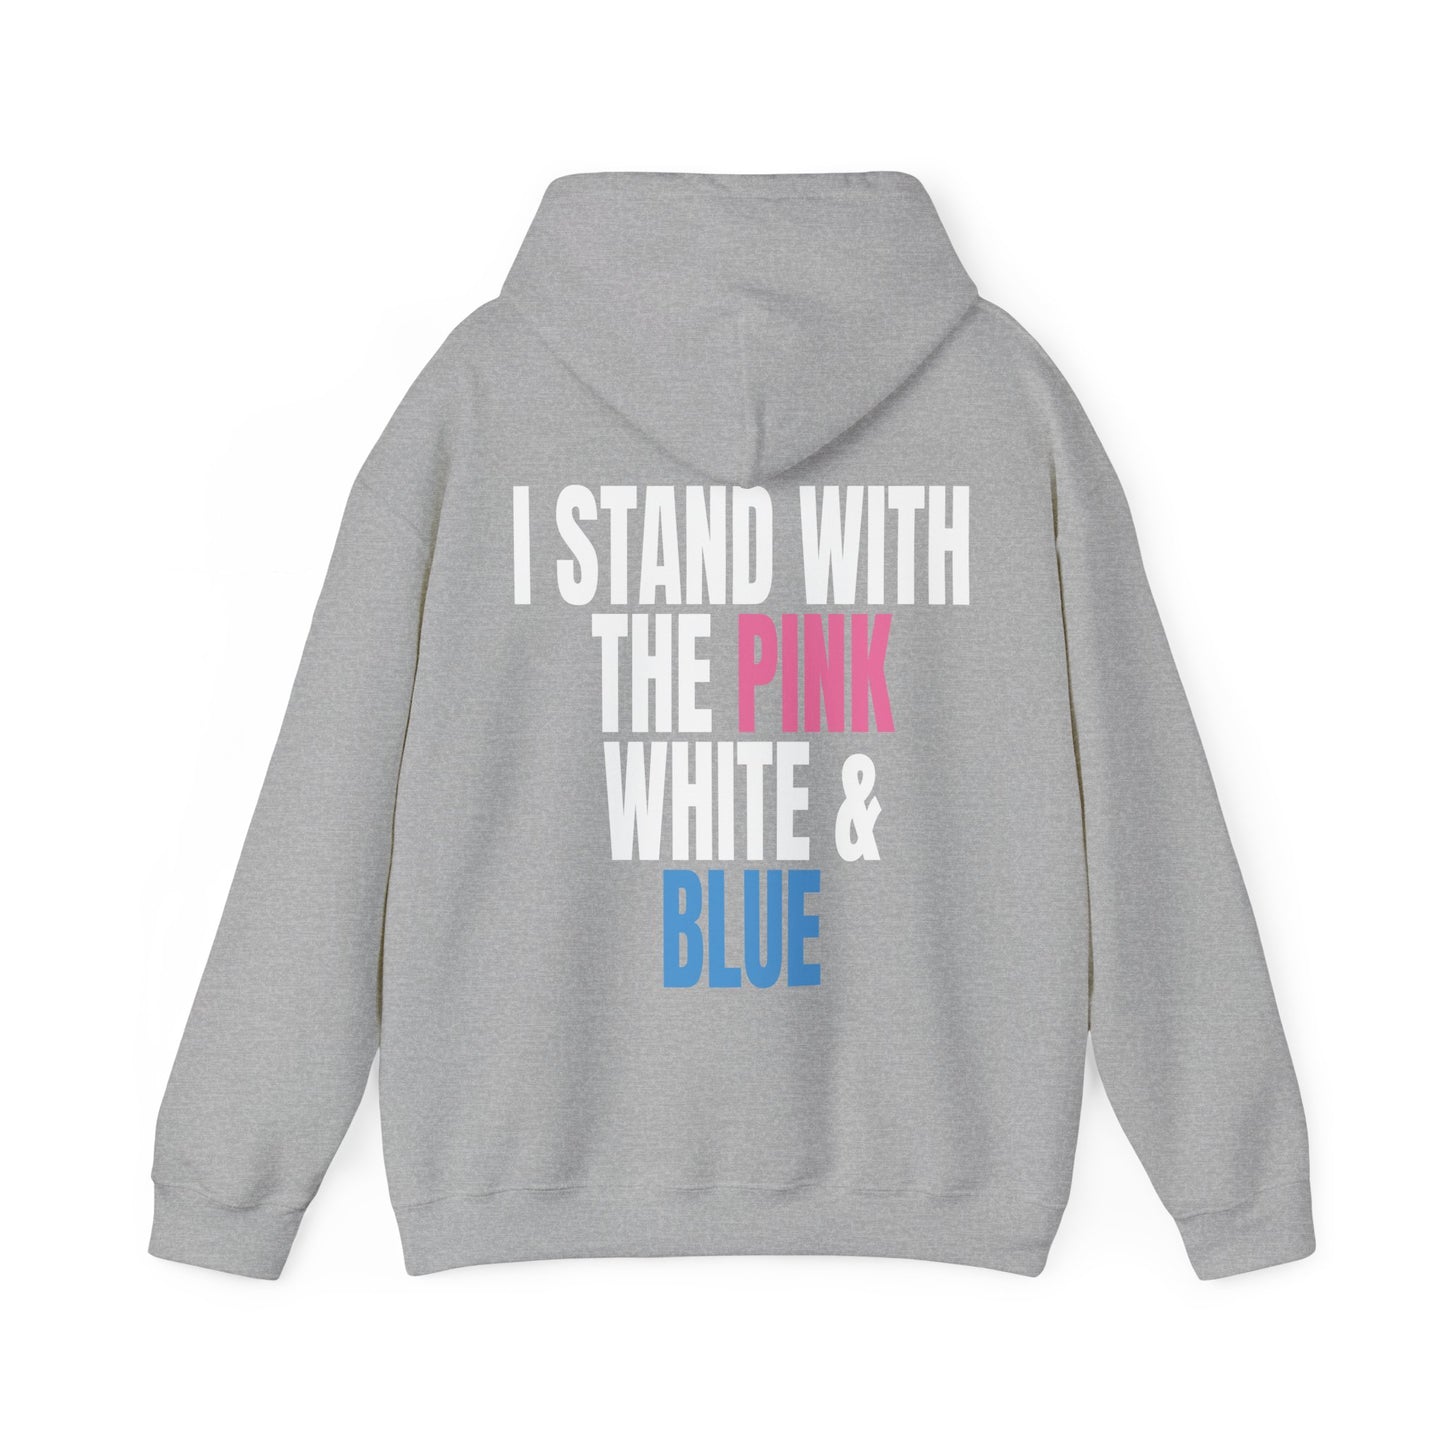 I Stand With The Pink White And Blue Hoodie